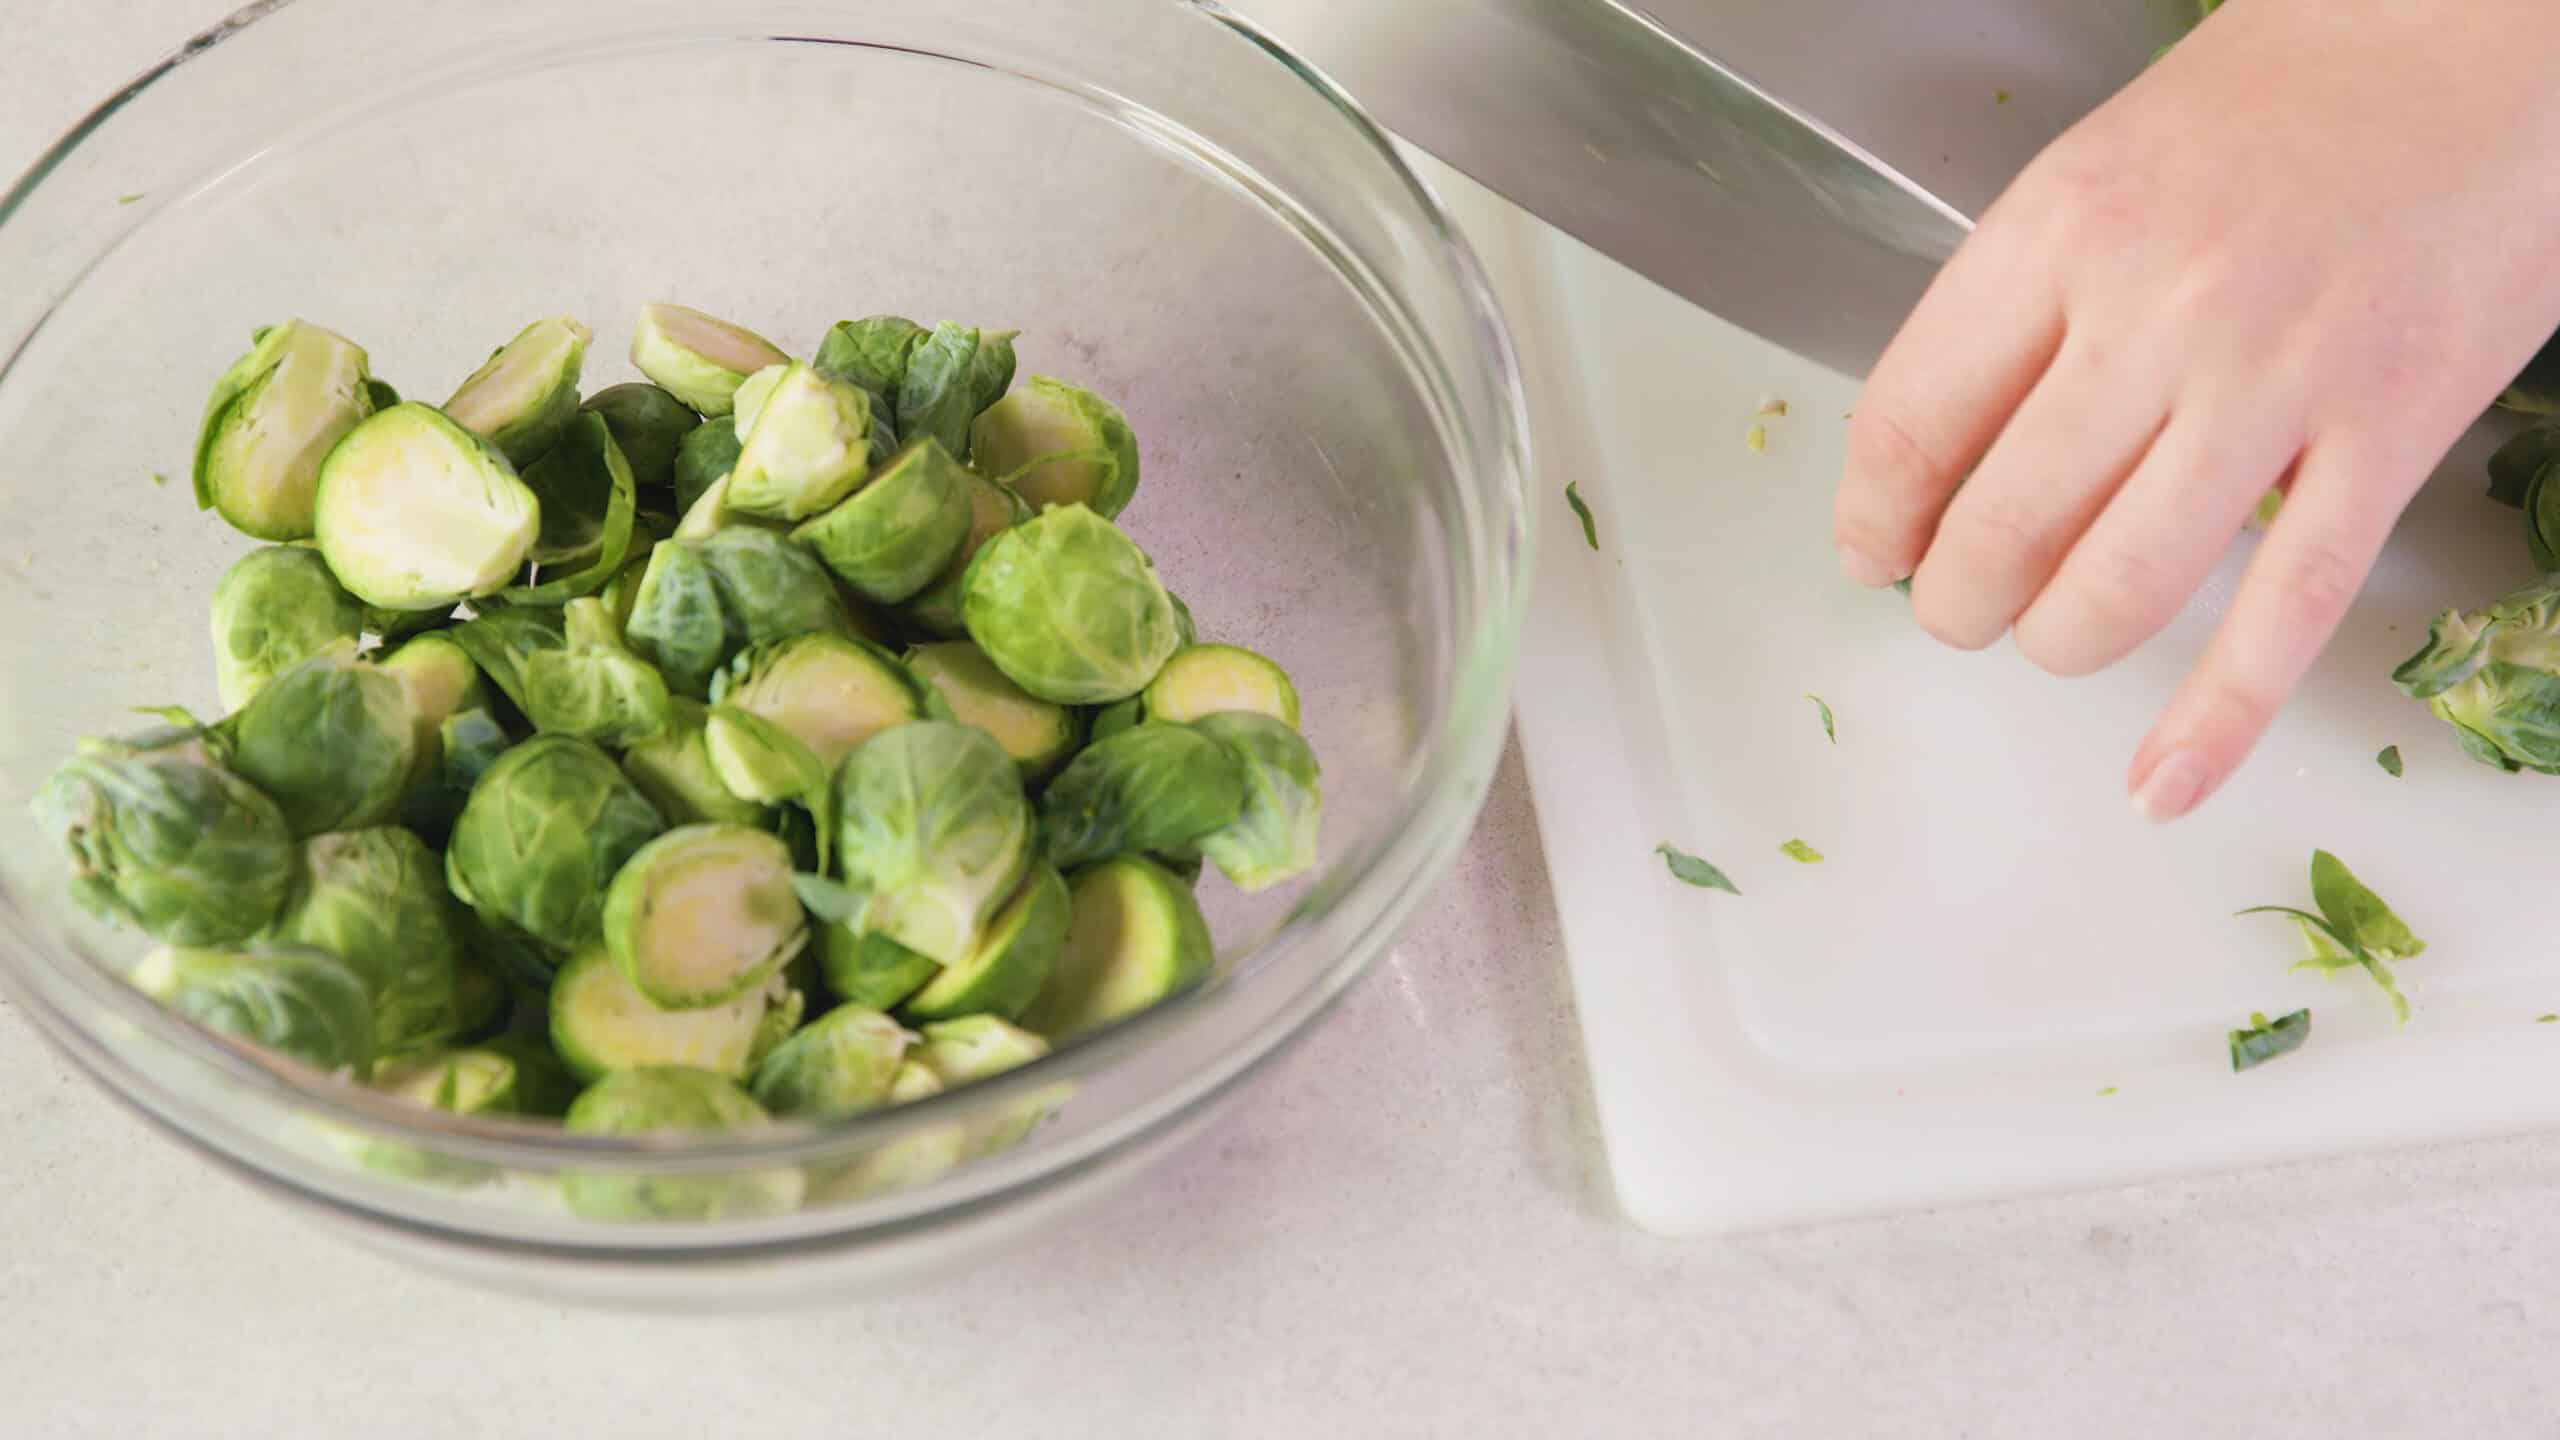 Angled view of a large clear glass mixing bowl filled with halved Brussel sprouts and a white plastic cutting board with a metal kitchen knife and a hand holding a single Brussel sprout all on a clean marble countertop.